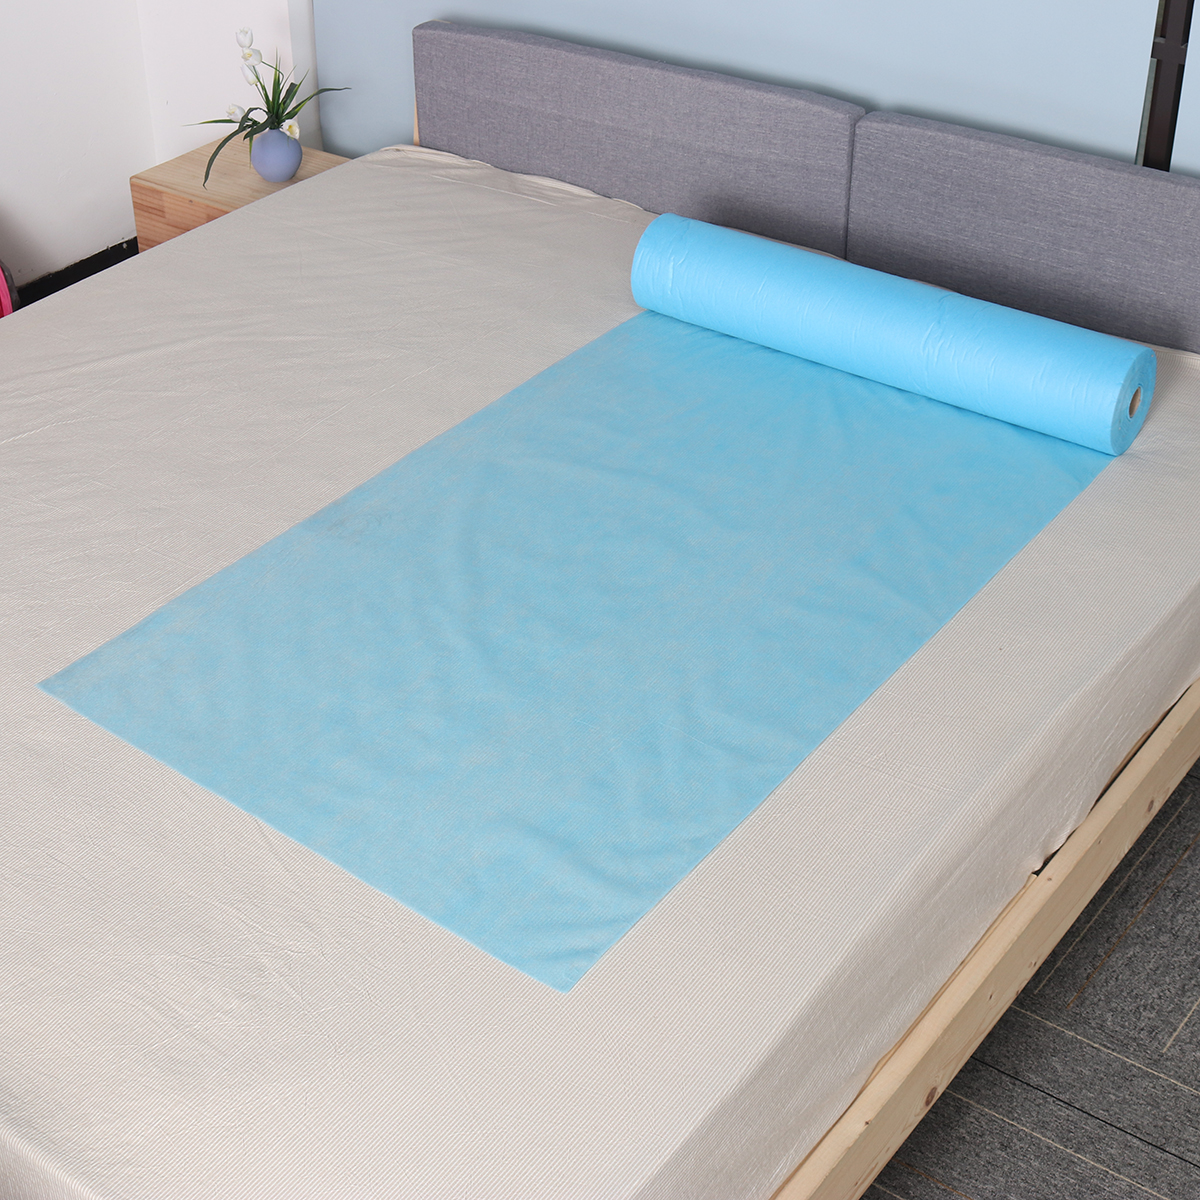 180x80cm-50PcsRoll-Disposable-Massage-Table-Bed-Cover-Sheet-Beauty-Waxing-1737148-8